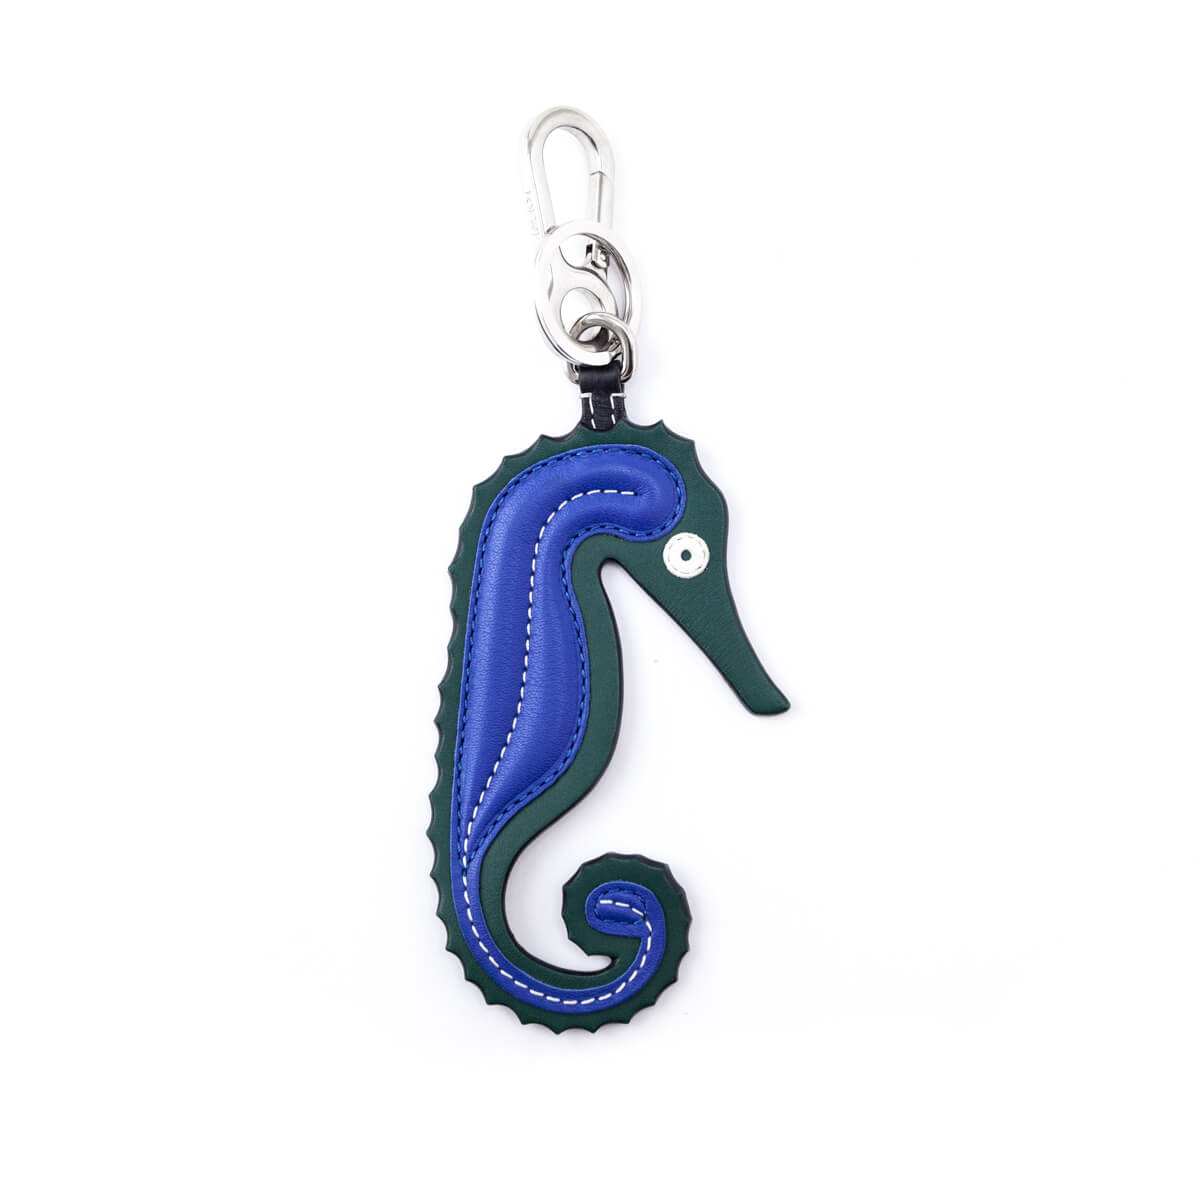 Loewe Blue & Green Leather Seahorse Bag Charm Keychain - Love that Bag etc - Preowned Authentic Designer Handbags & Preloved Fashions